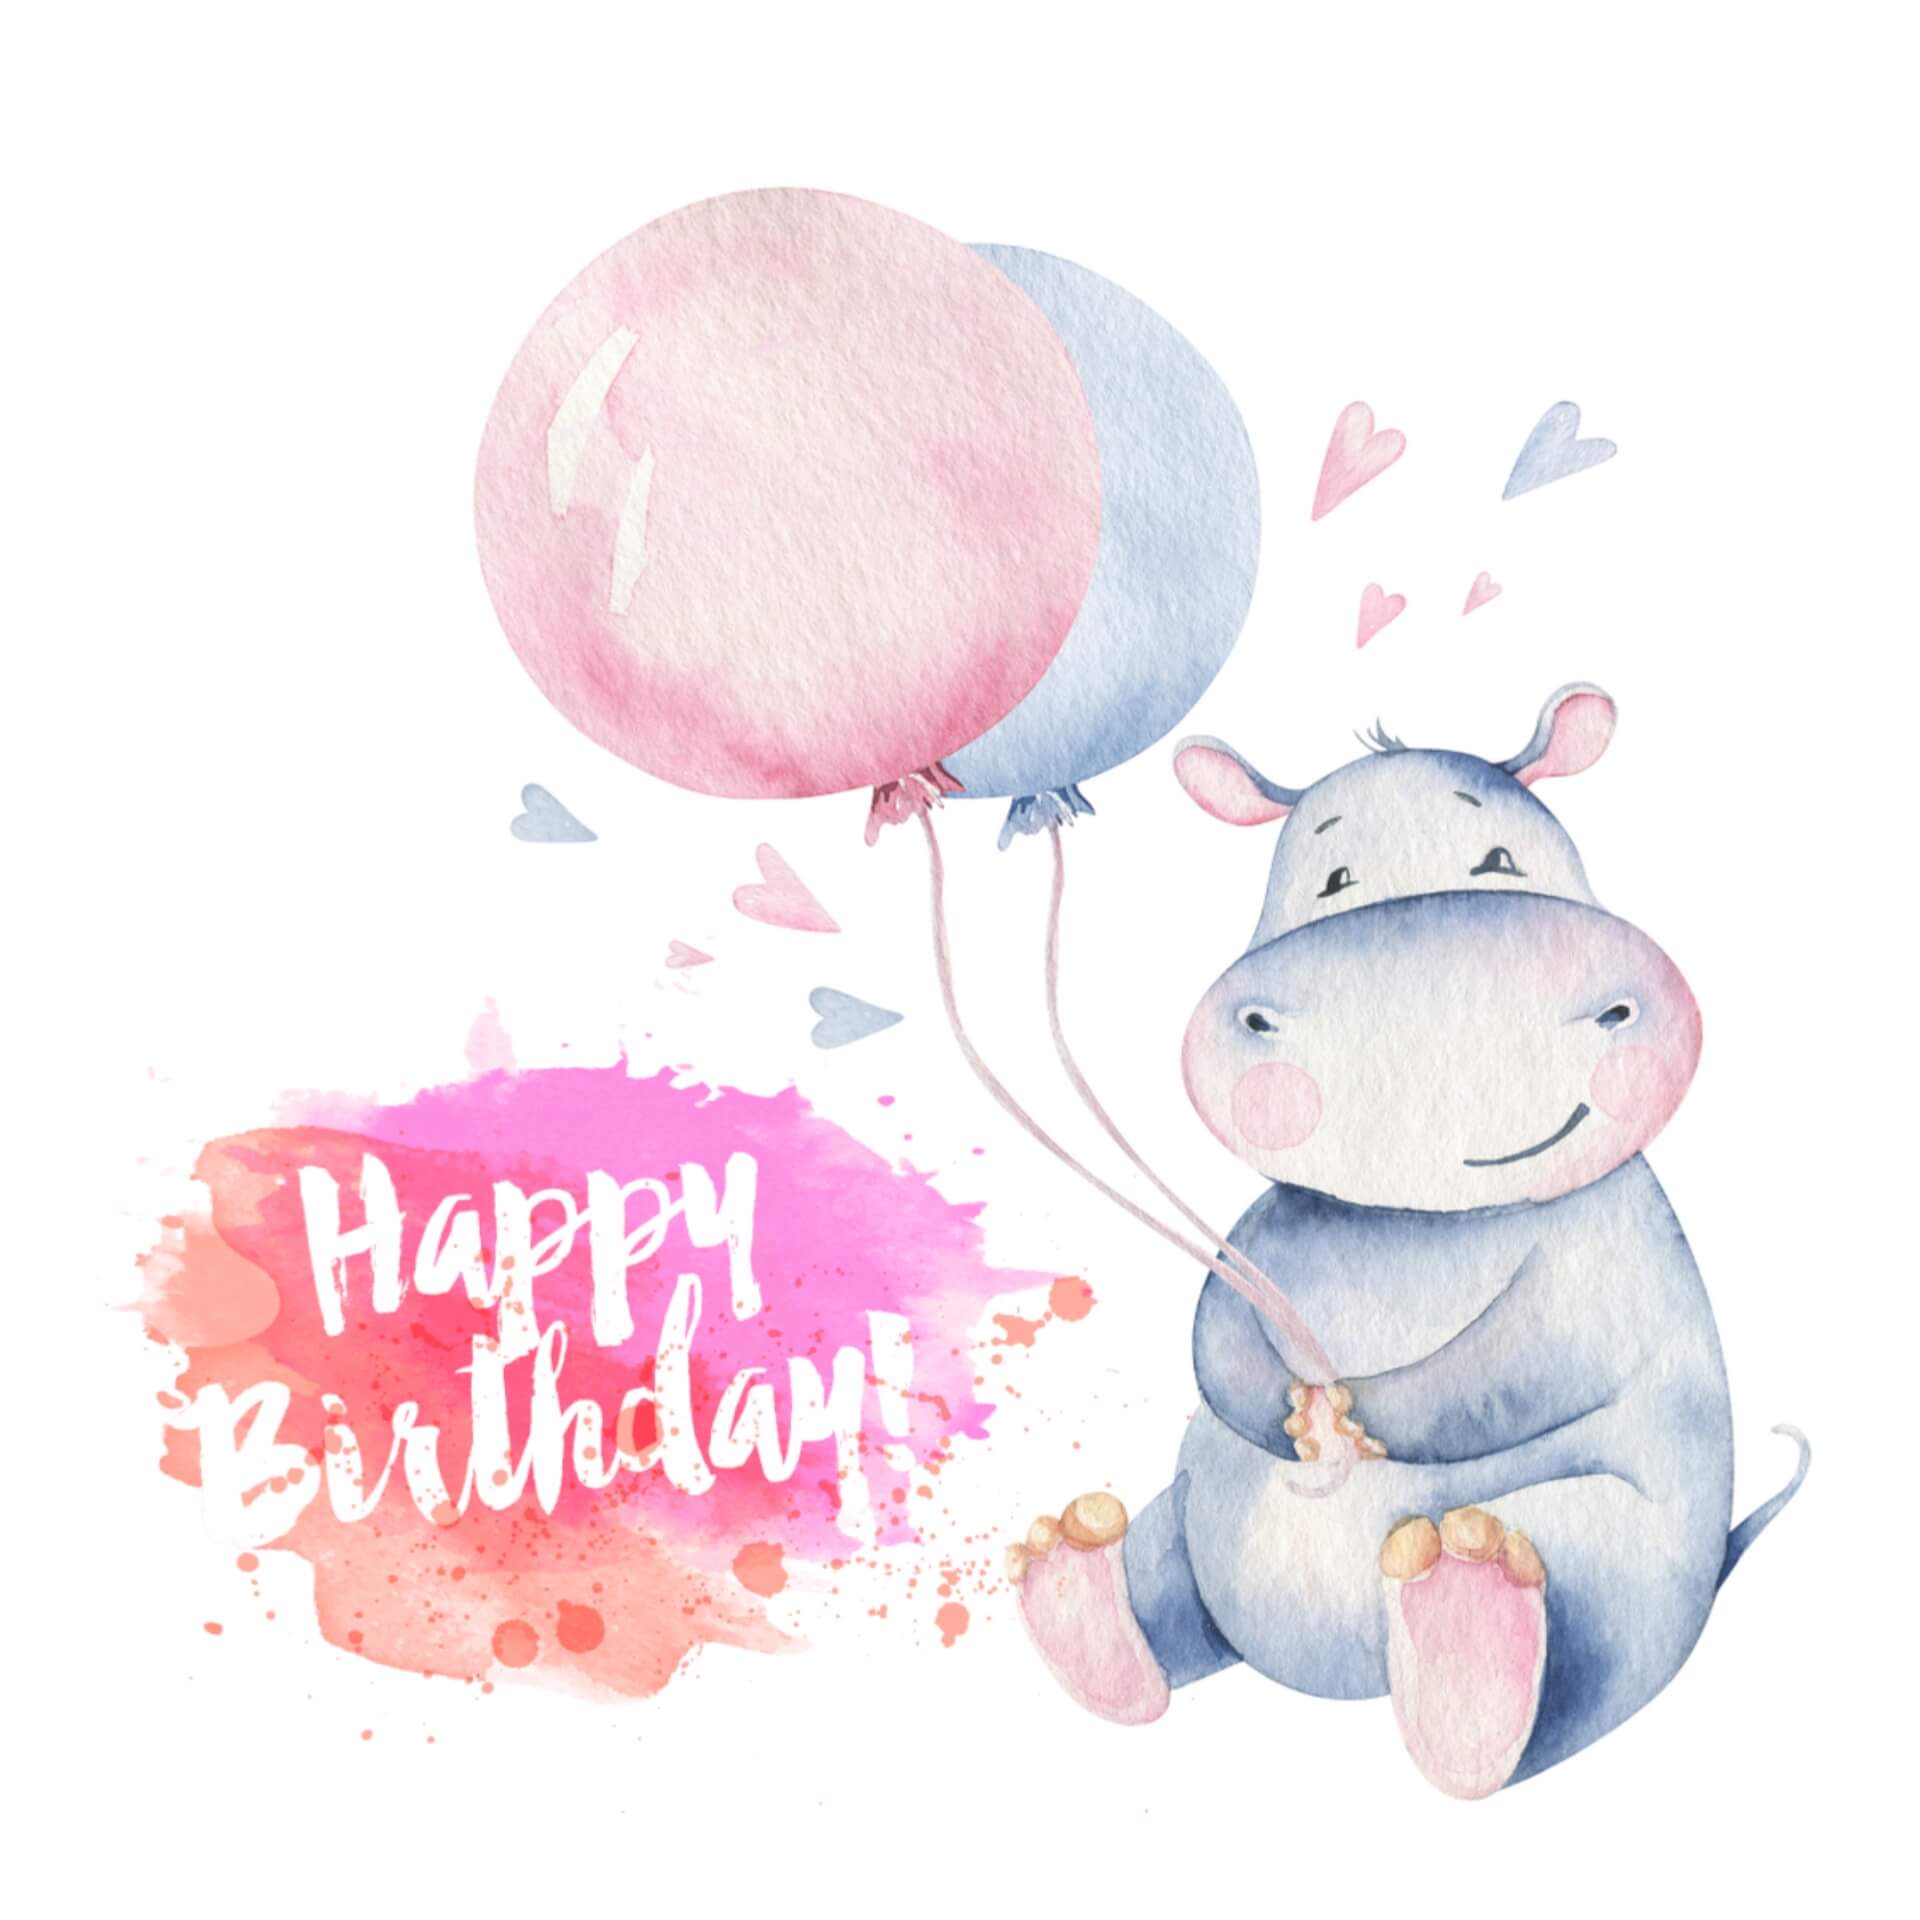 Cute Happy Birthday Images